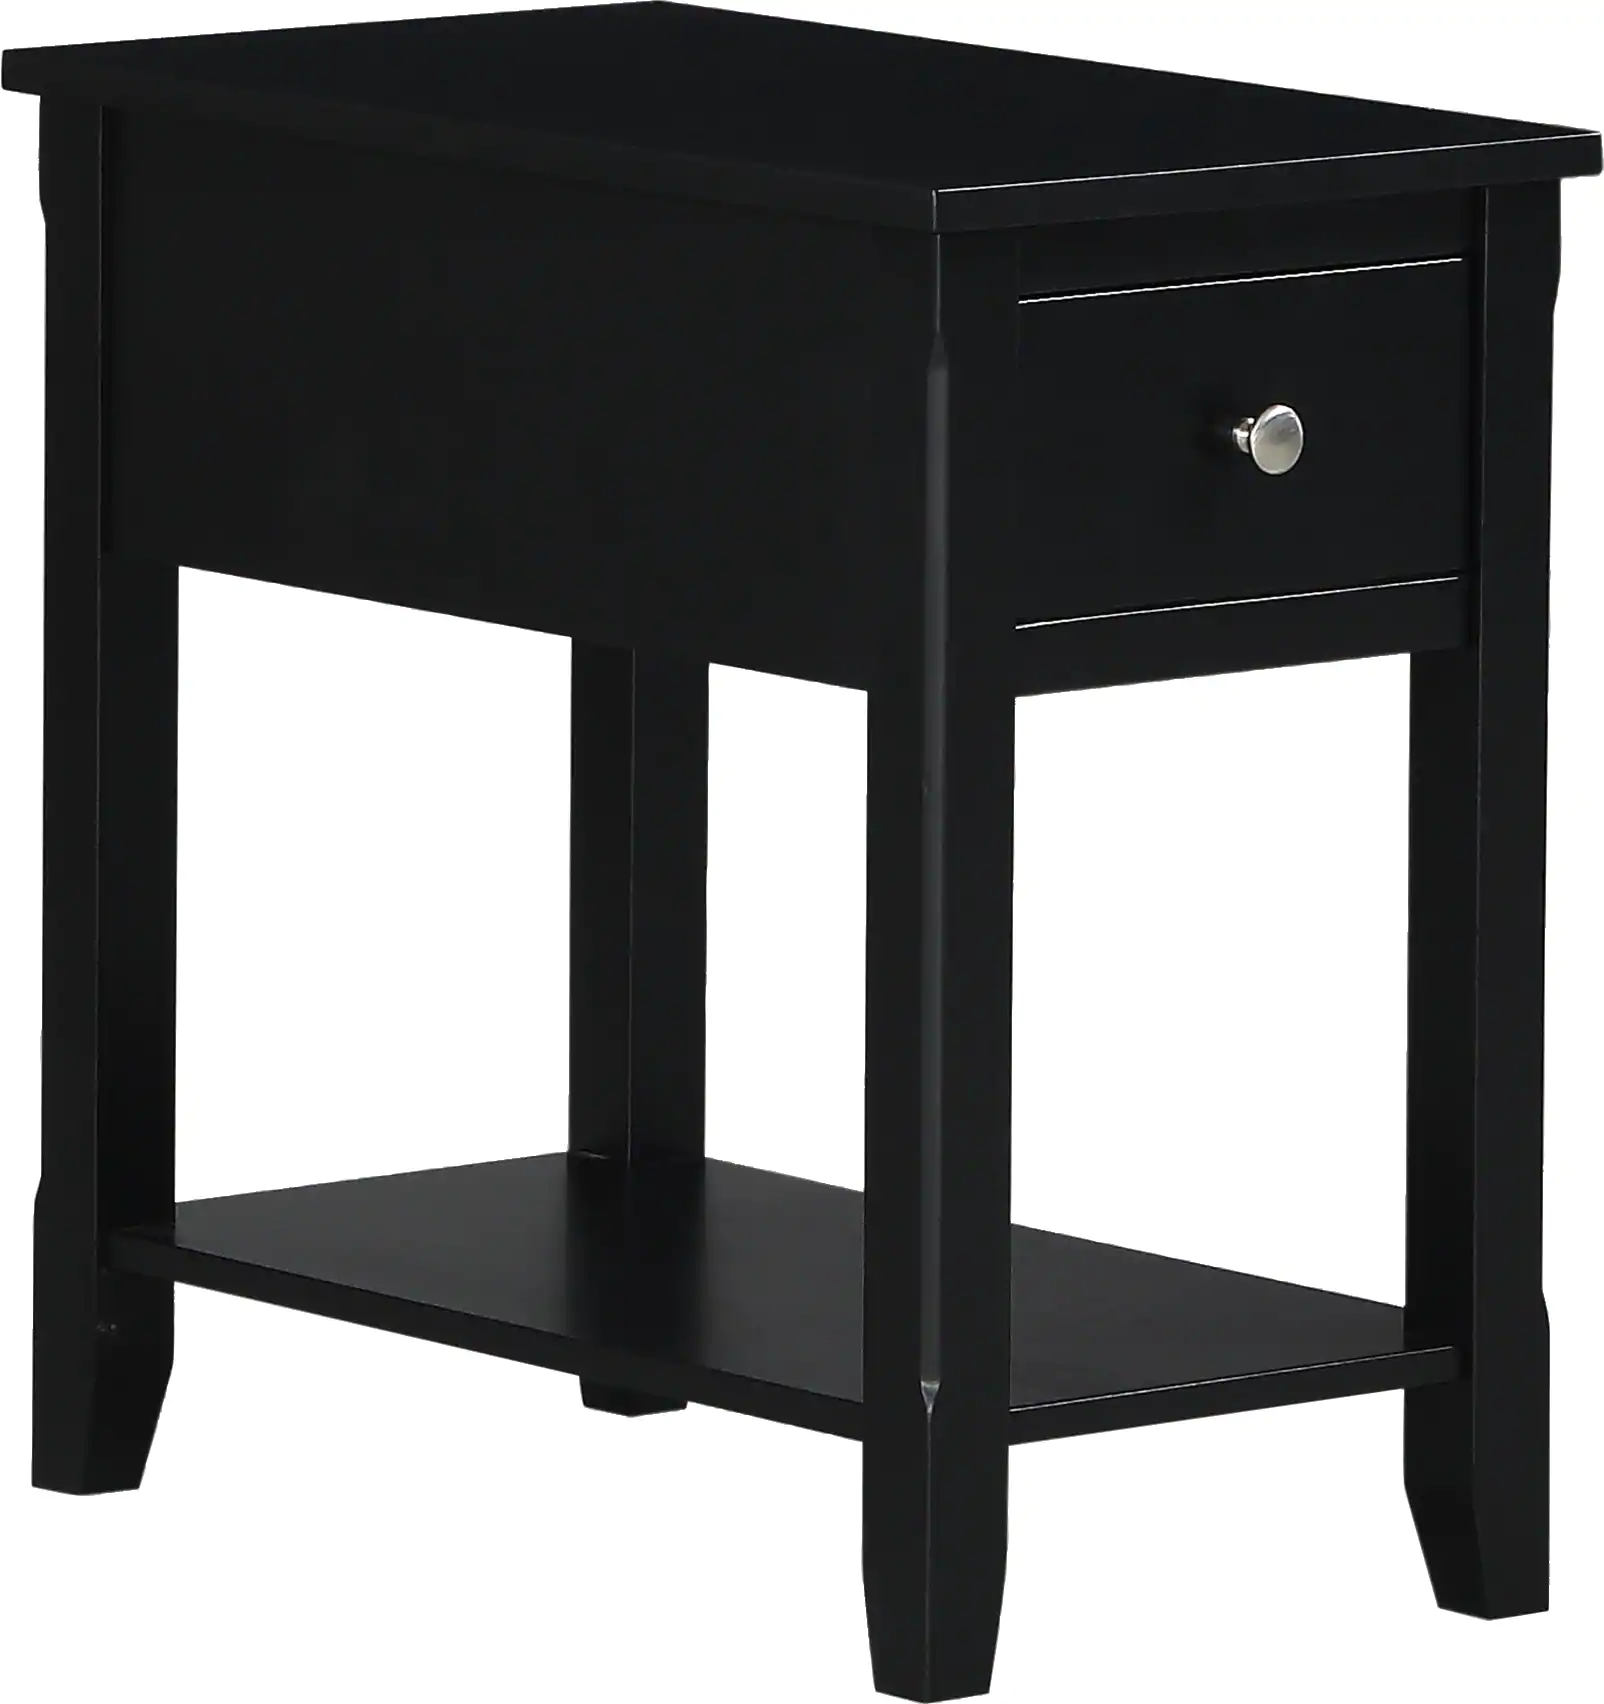 ardale black accent table tables colors with drawer round furniture winnipeg white living room ideas inch square vinyl tablecloth ashley drop leaf small couch end grill brush